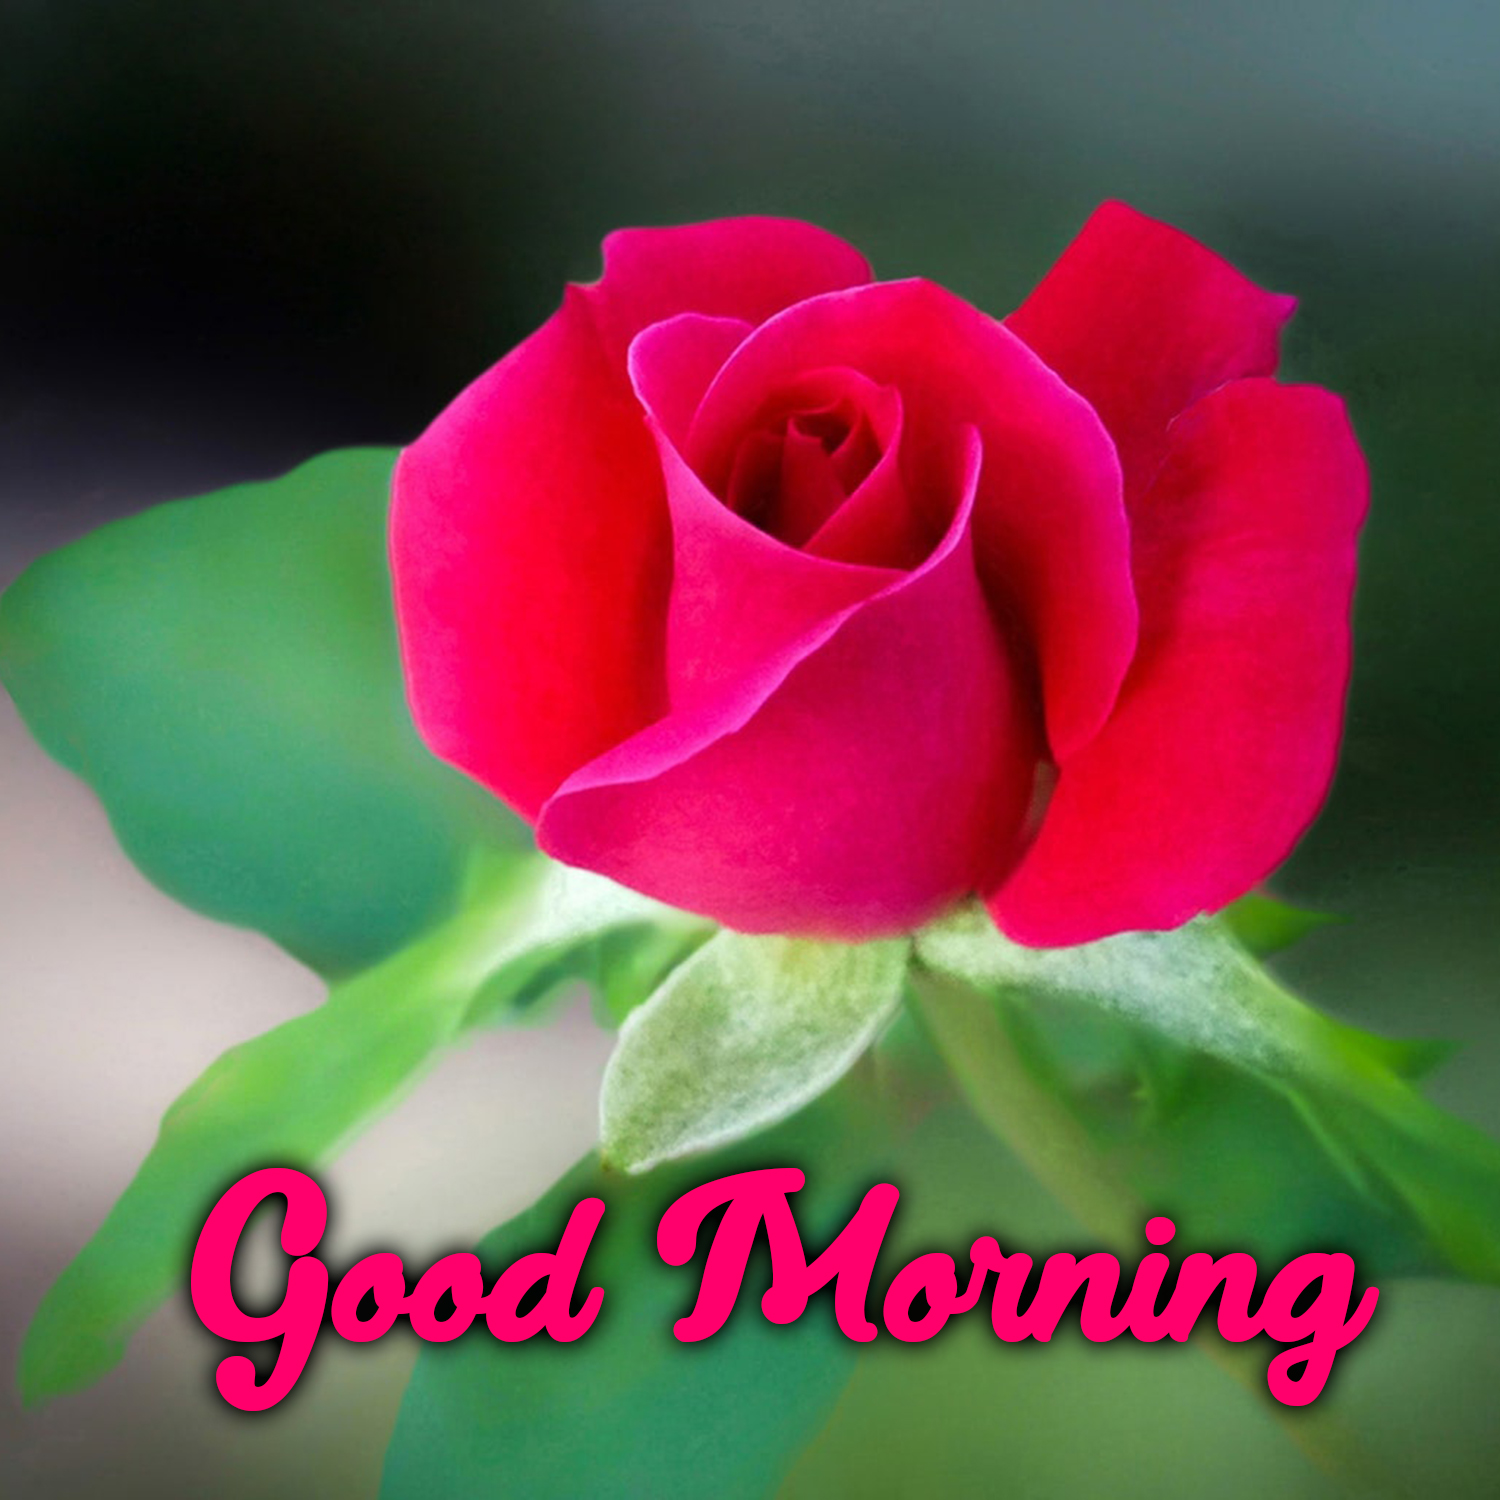 Easily Downloadable Good Morning love images - Good Morning Images, Quotes,  Wishes, Messages, greetings & eCards